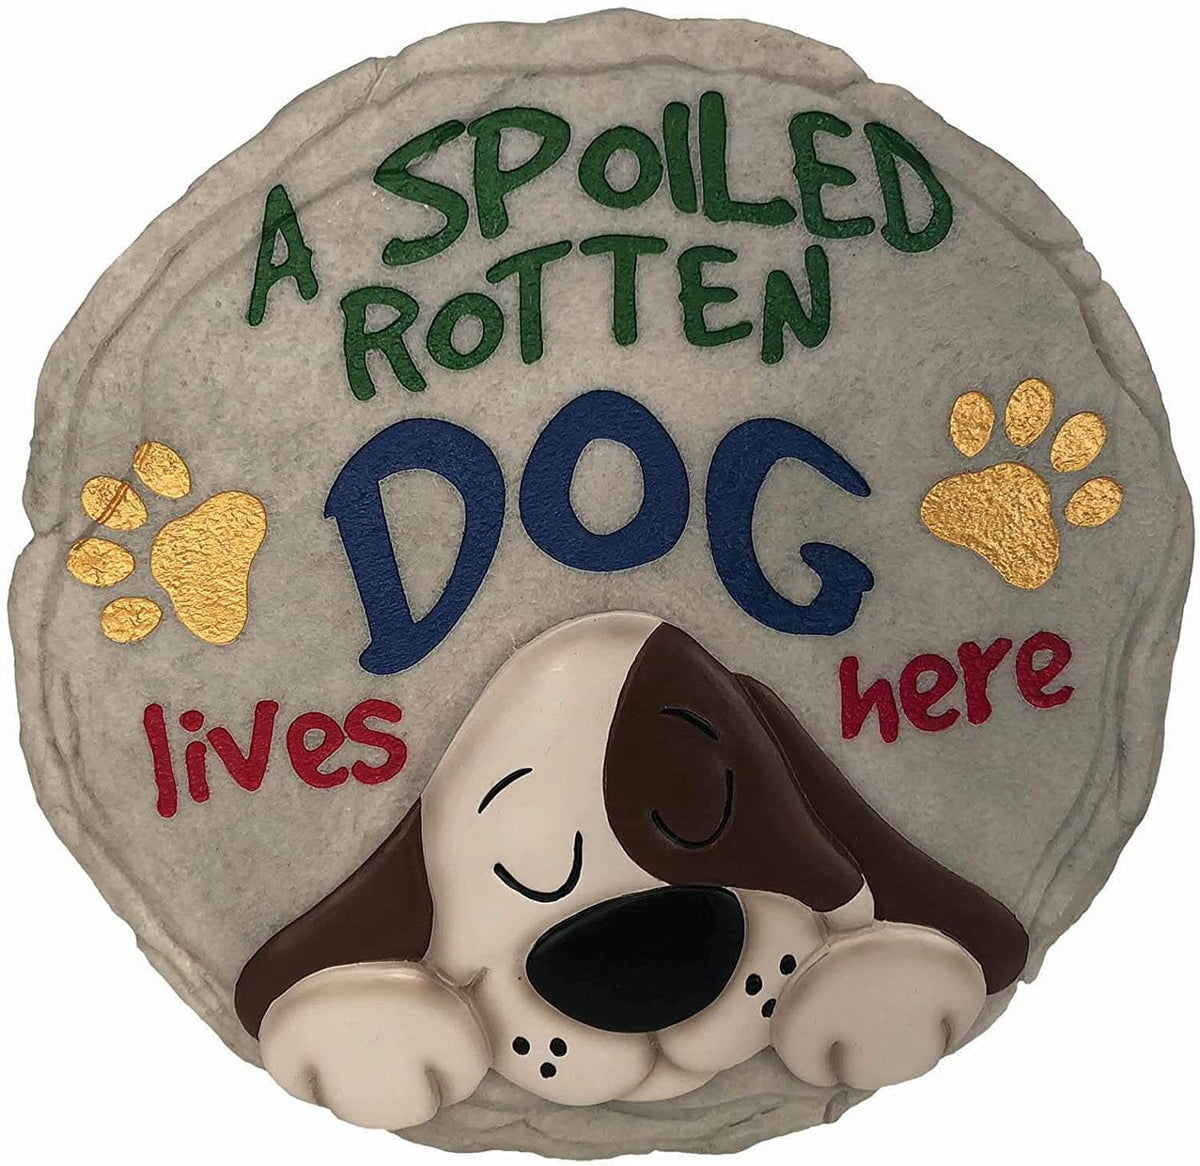 A Spoiled Rotten Dog Decorative Garden Stone- The House of Awareness